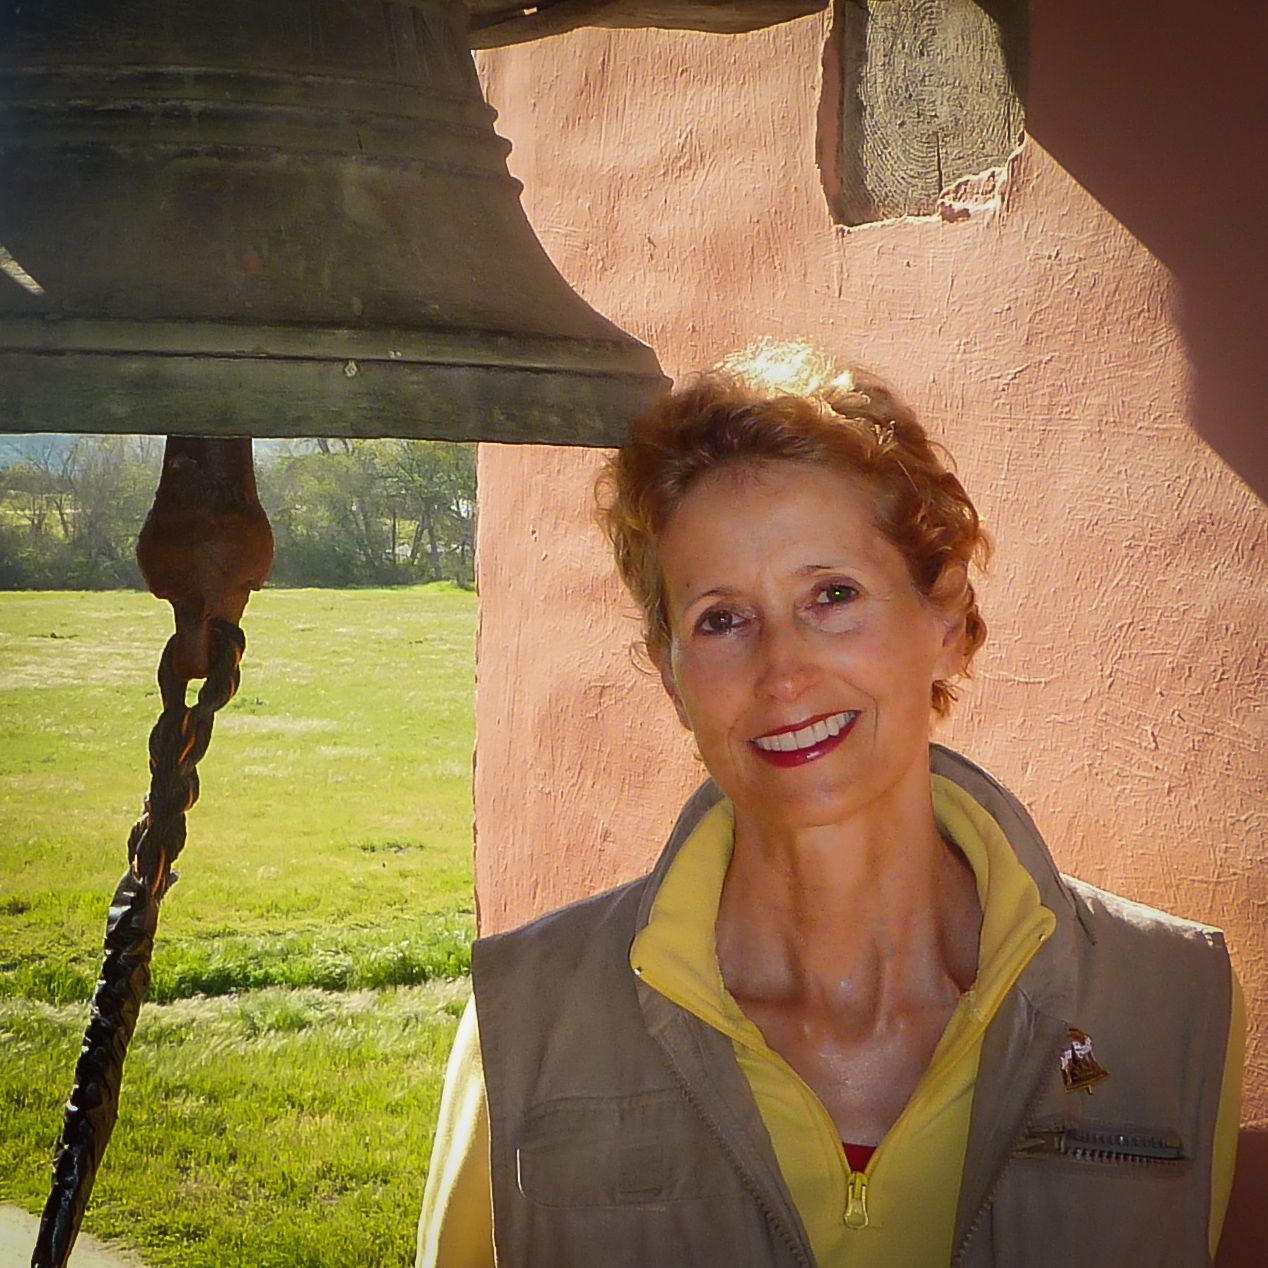 Day 23: Edie poses in the bell tower at Mission La Purisima, near Lompoc, California